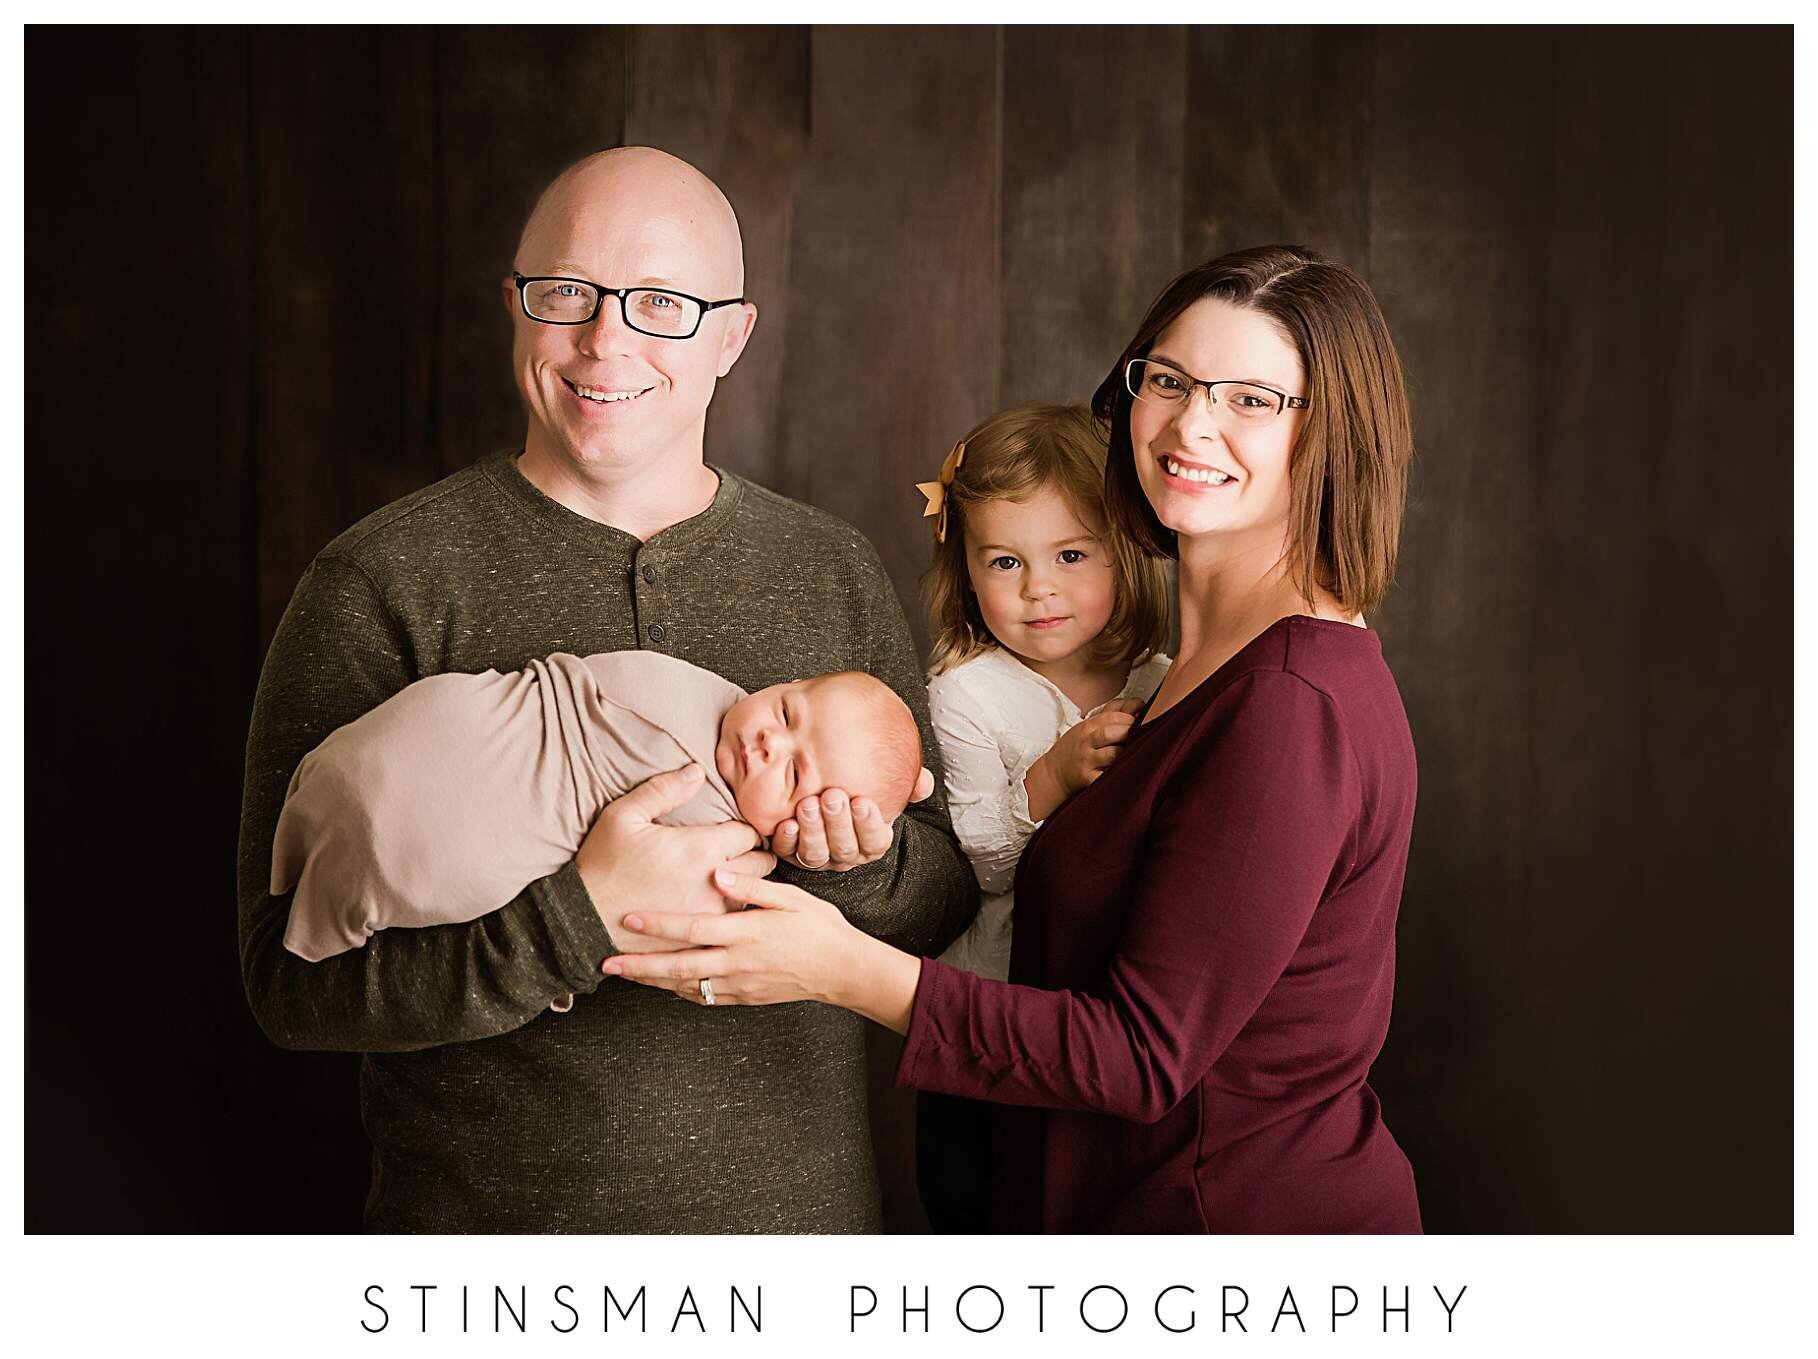 family-photo-on-brown-wood-backdrop-at newborn-session.jpeg